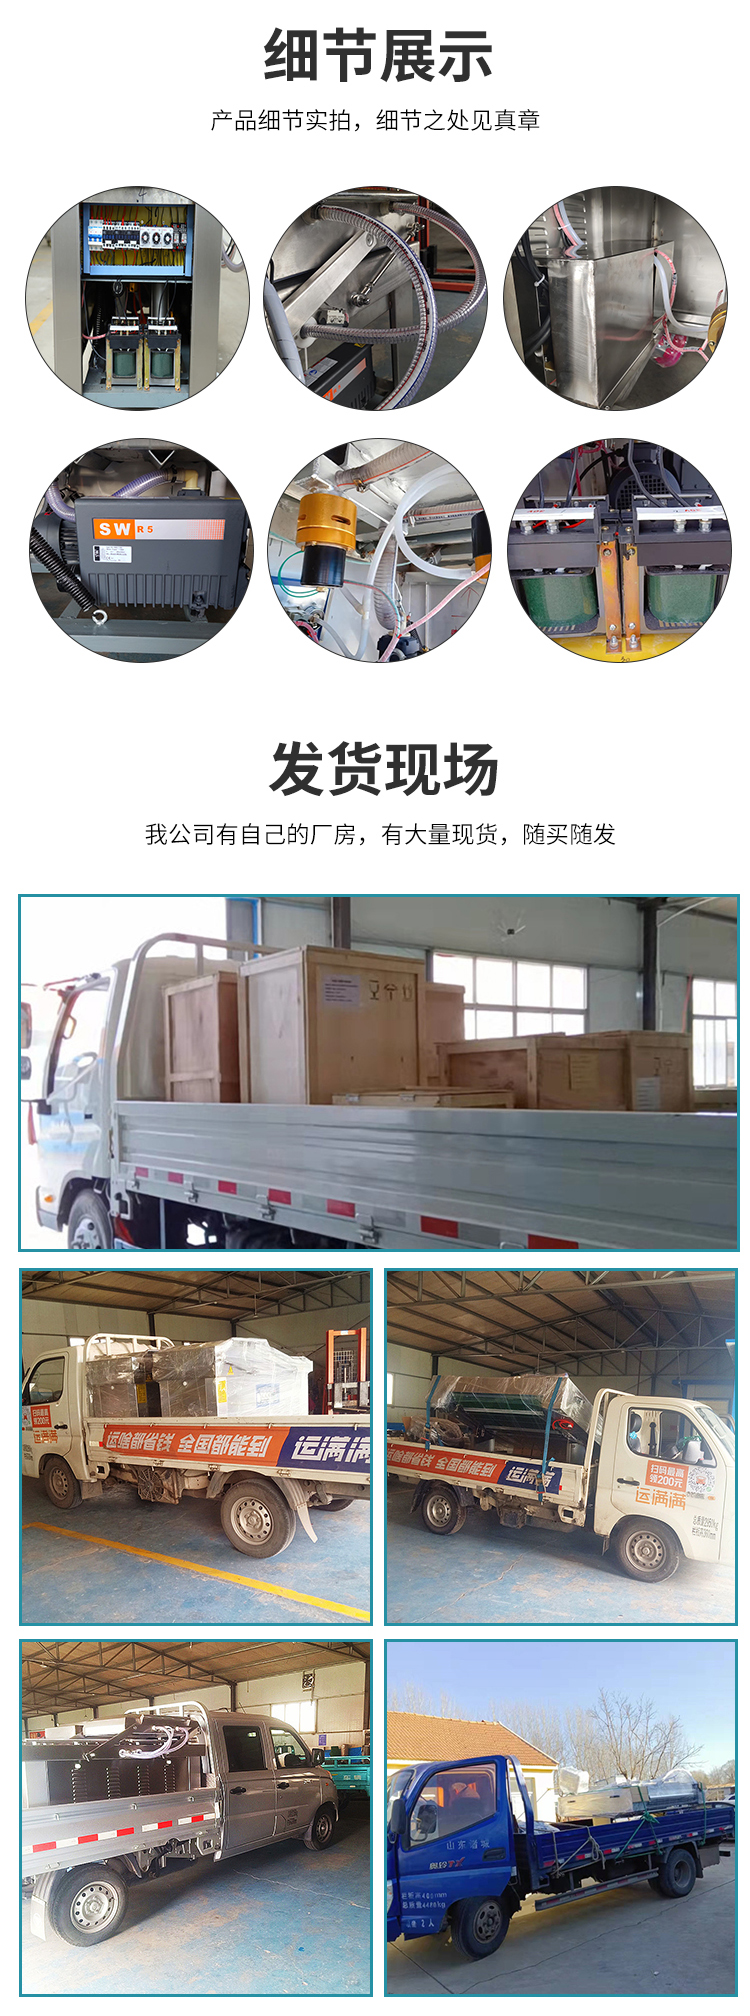 Bearing double chamber Vacuum packing machine, electronic accessories and other platform packaging equipment, continuous sealing machine